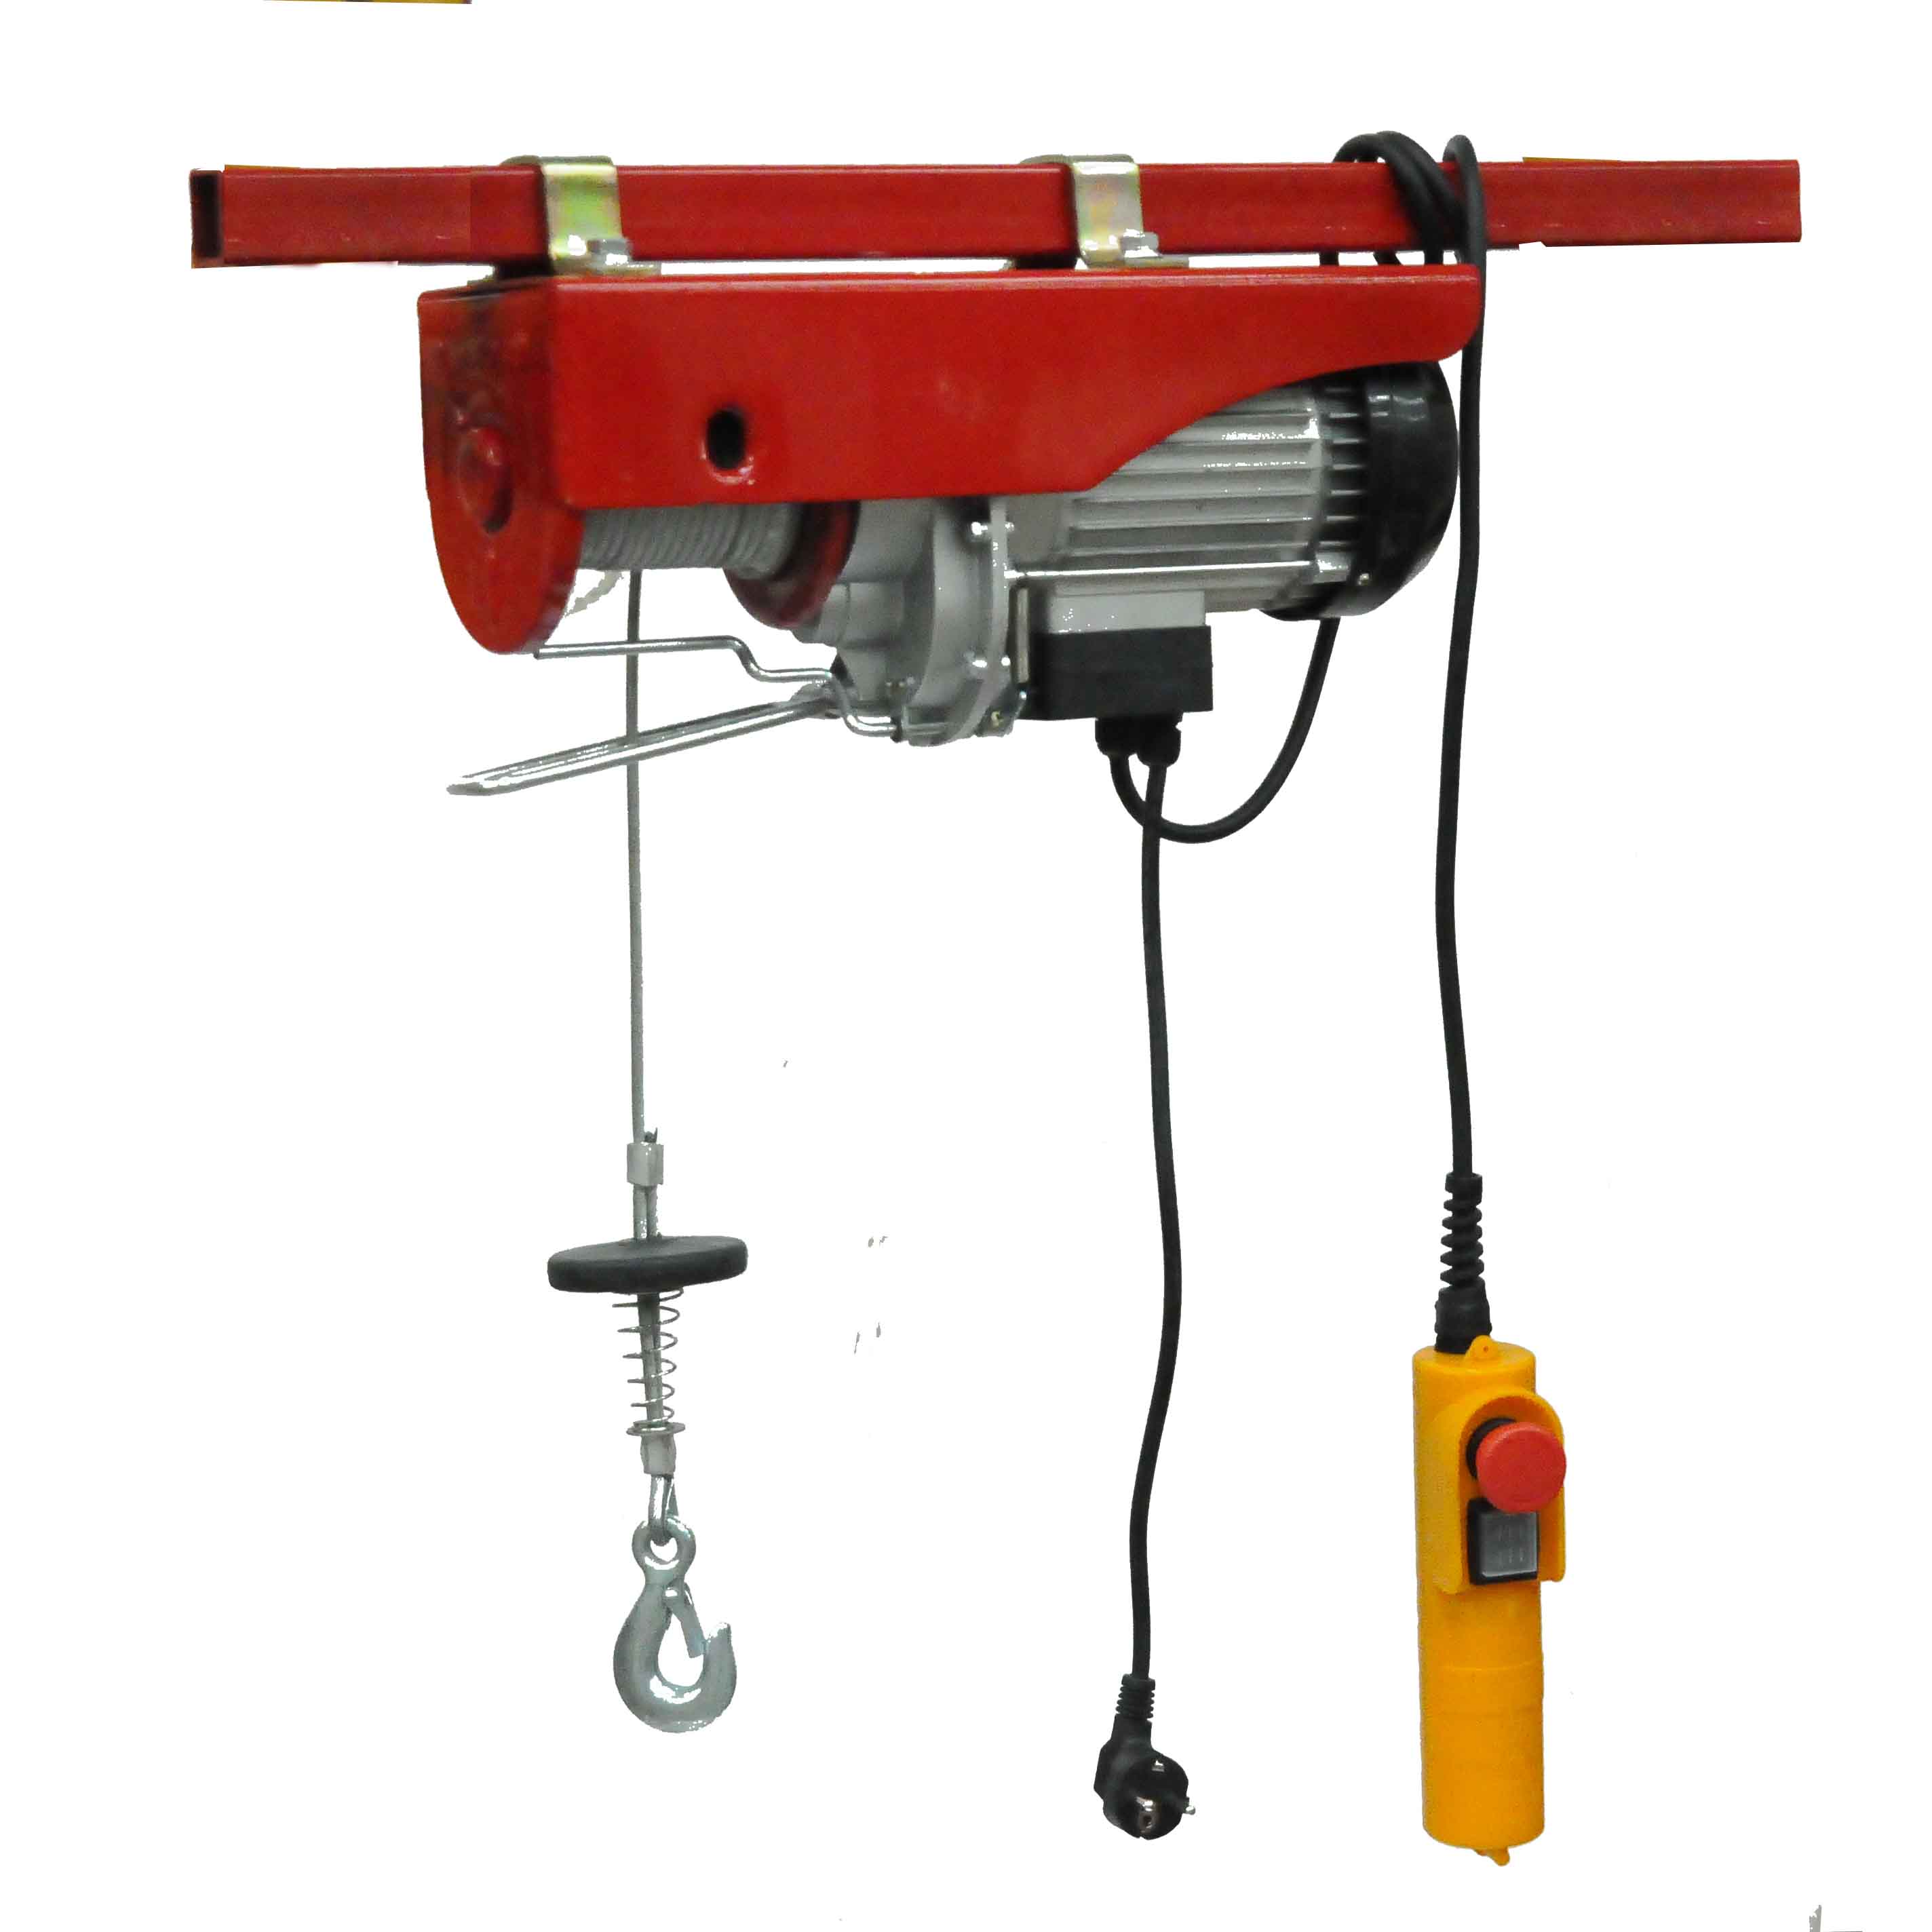 1100lbs-electric hoist-M-series-related-voltage-110V.jpg